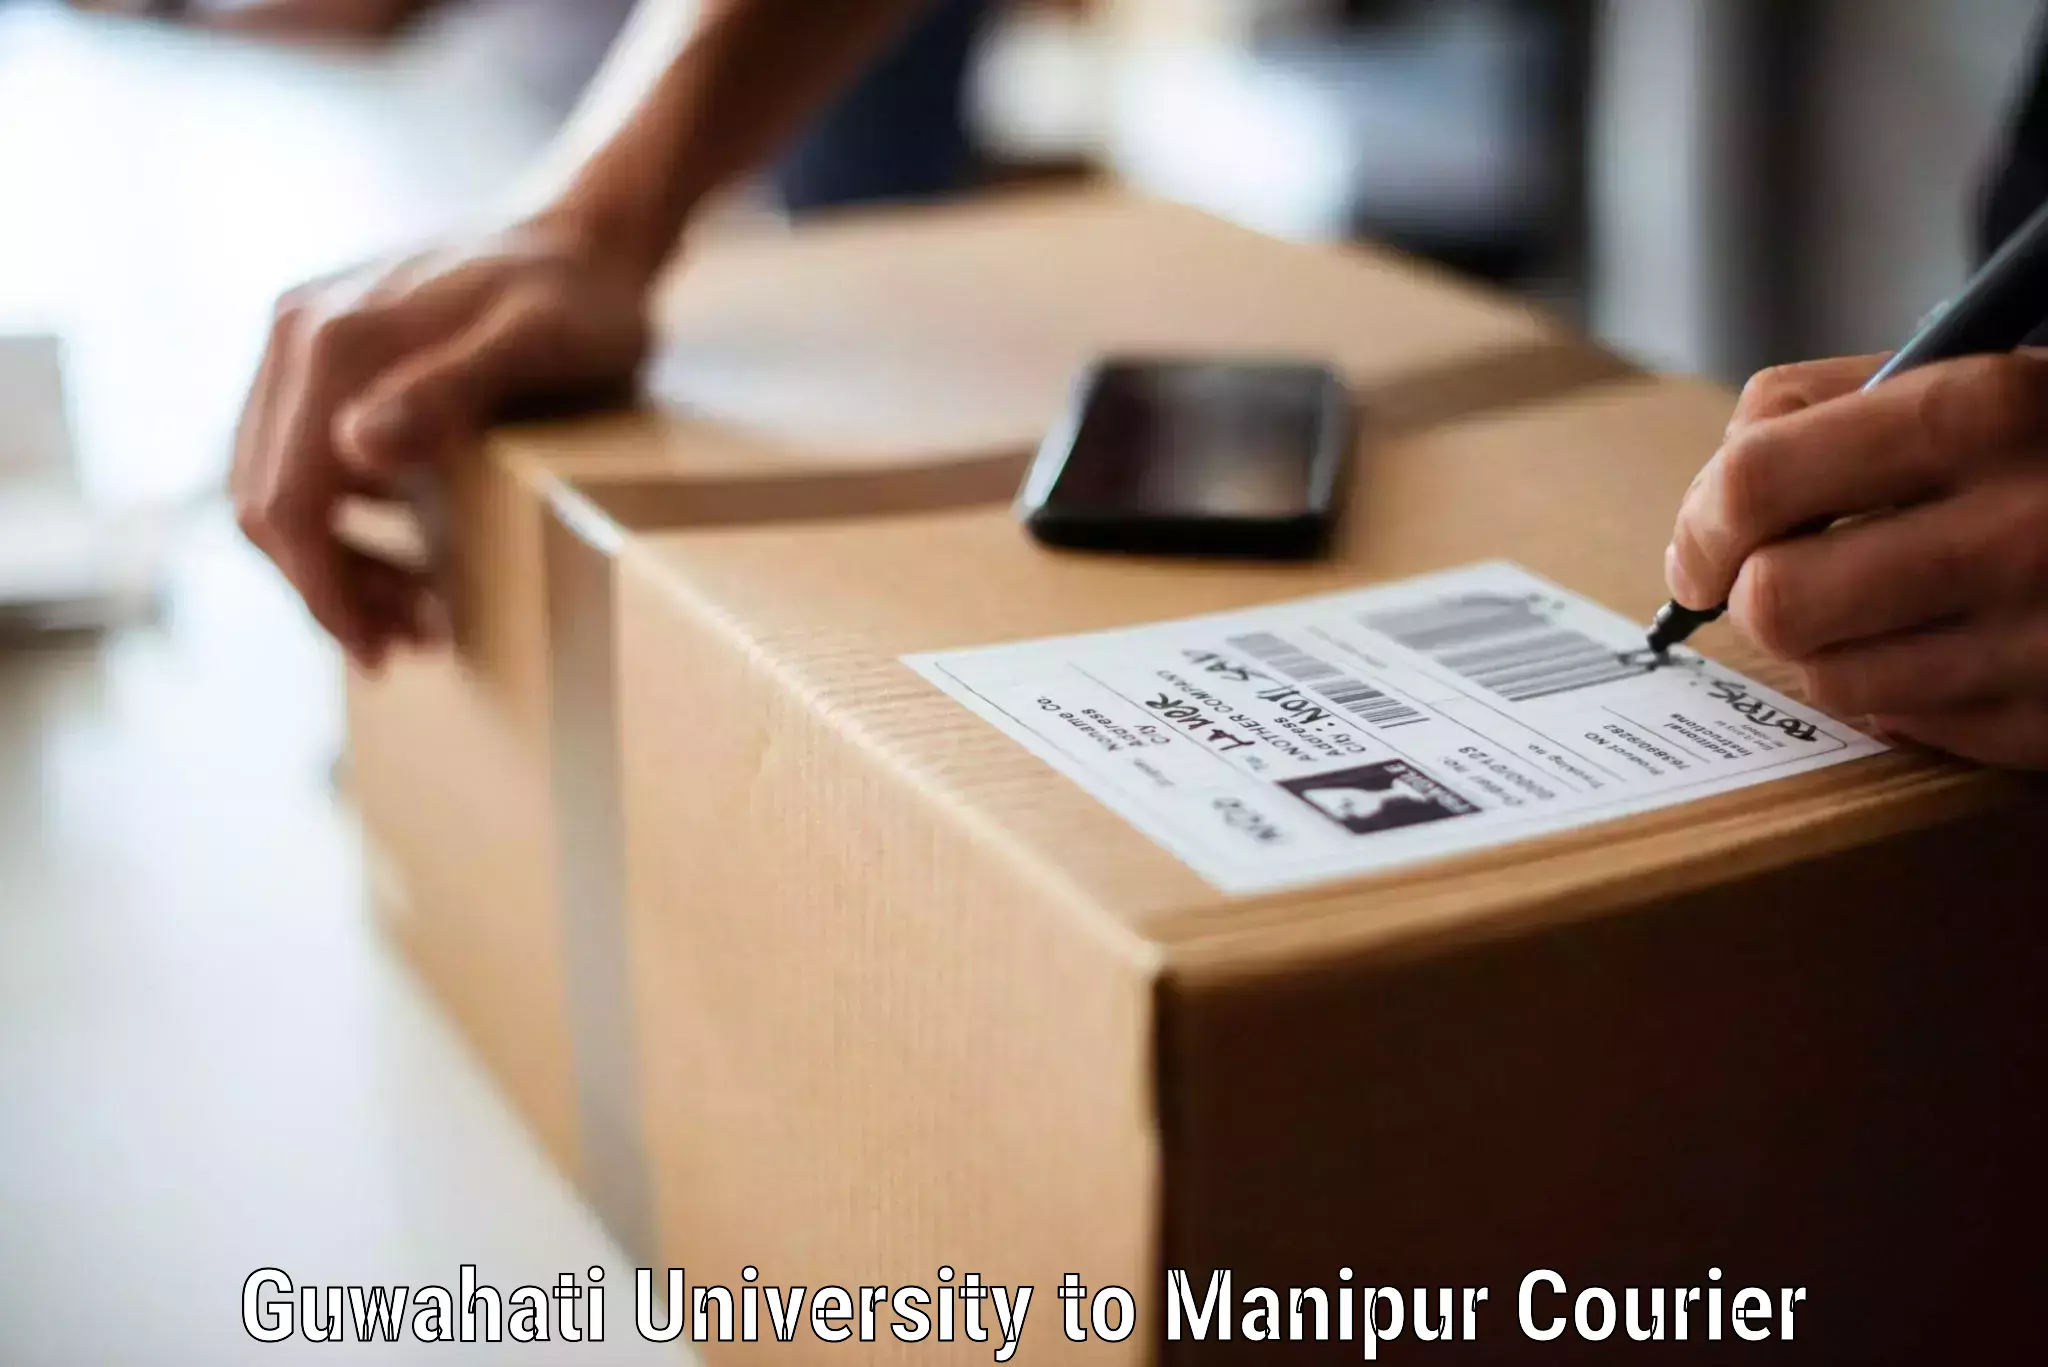 Professional moving company in Guwahati University to NIT Manipur